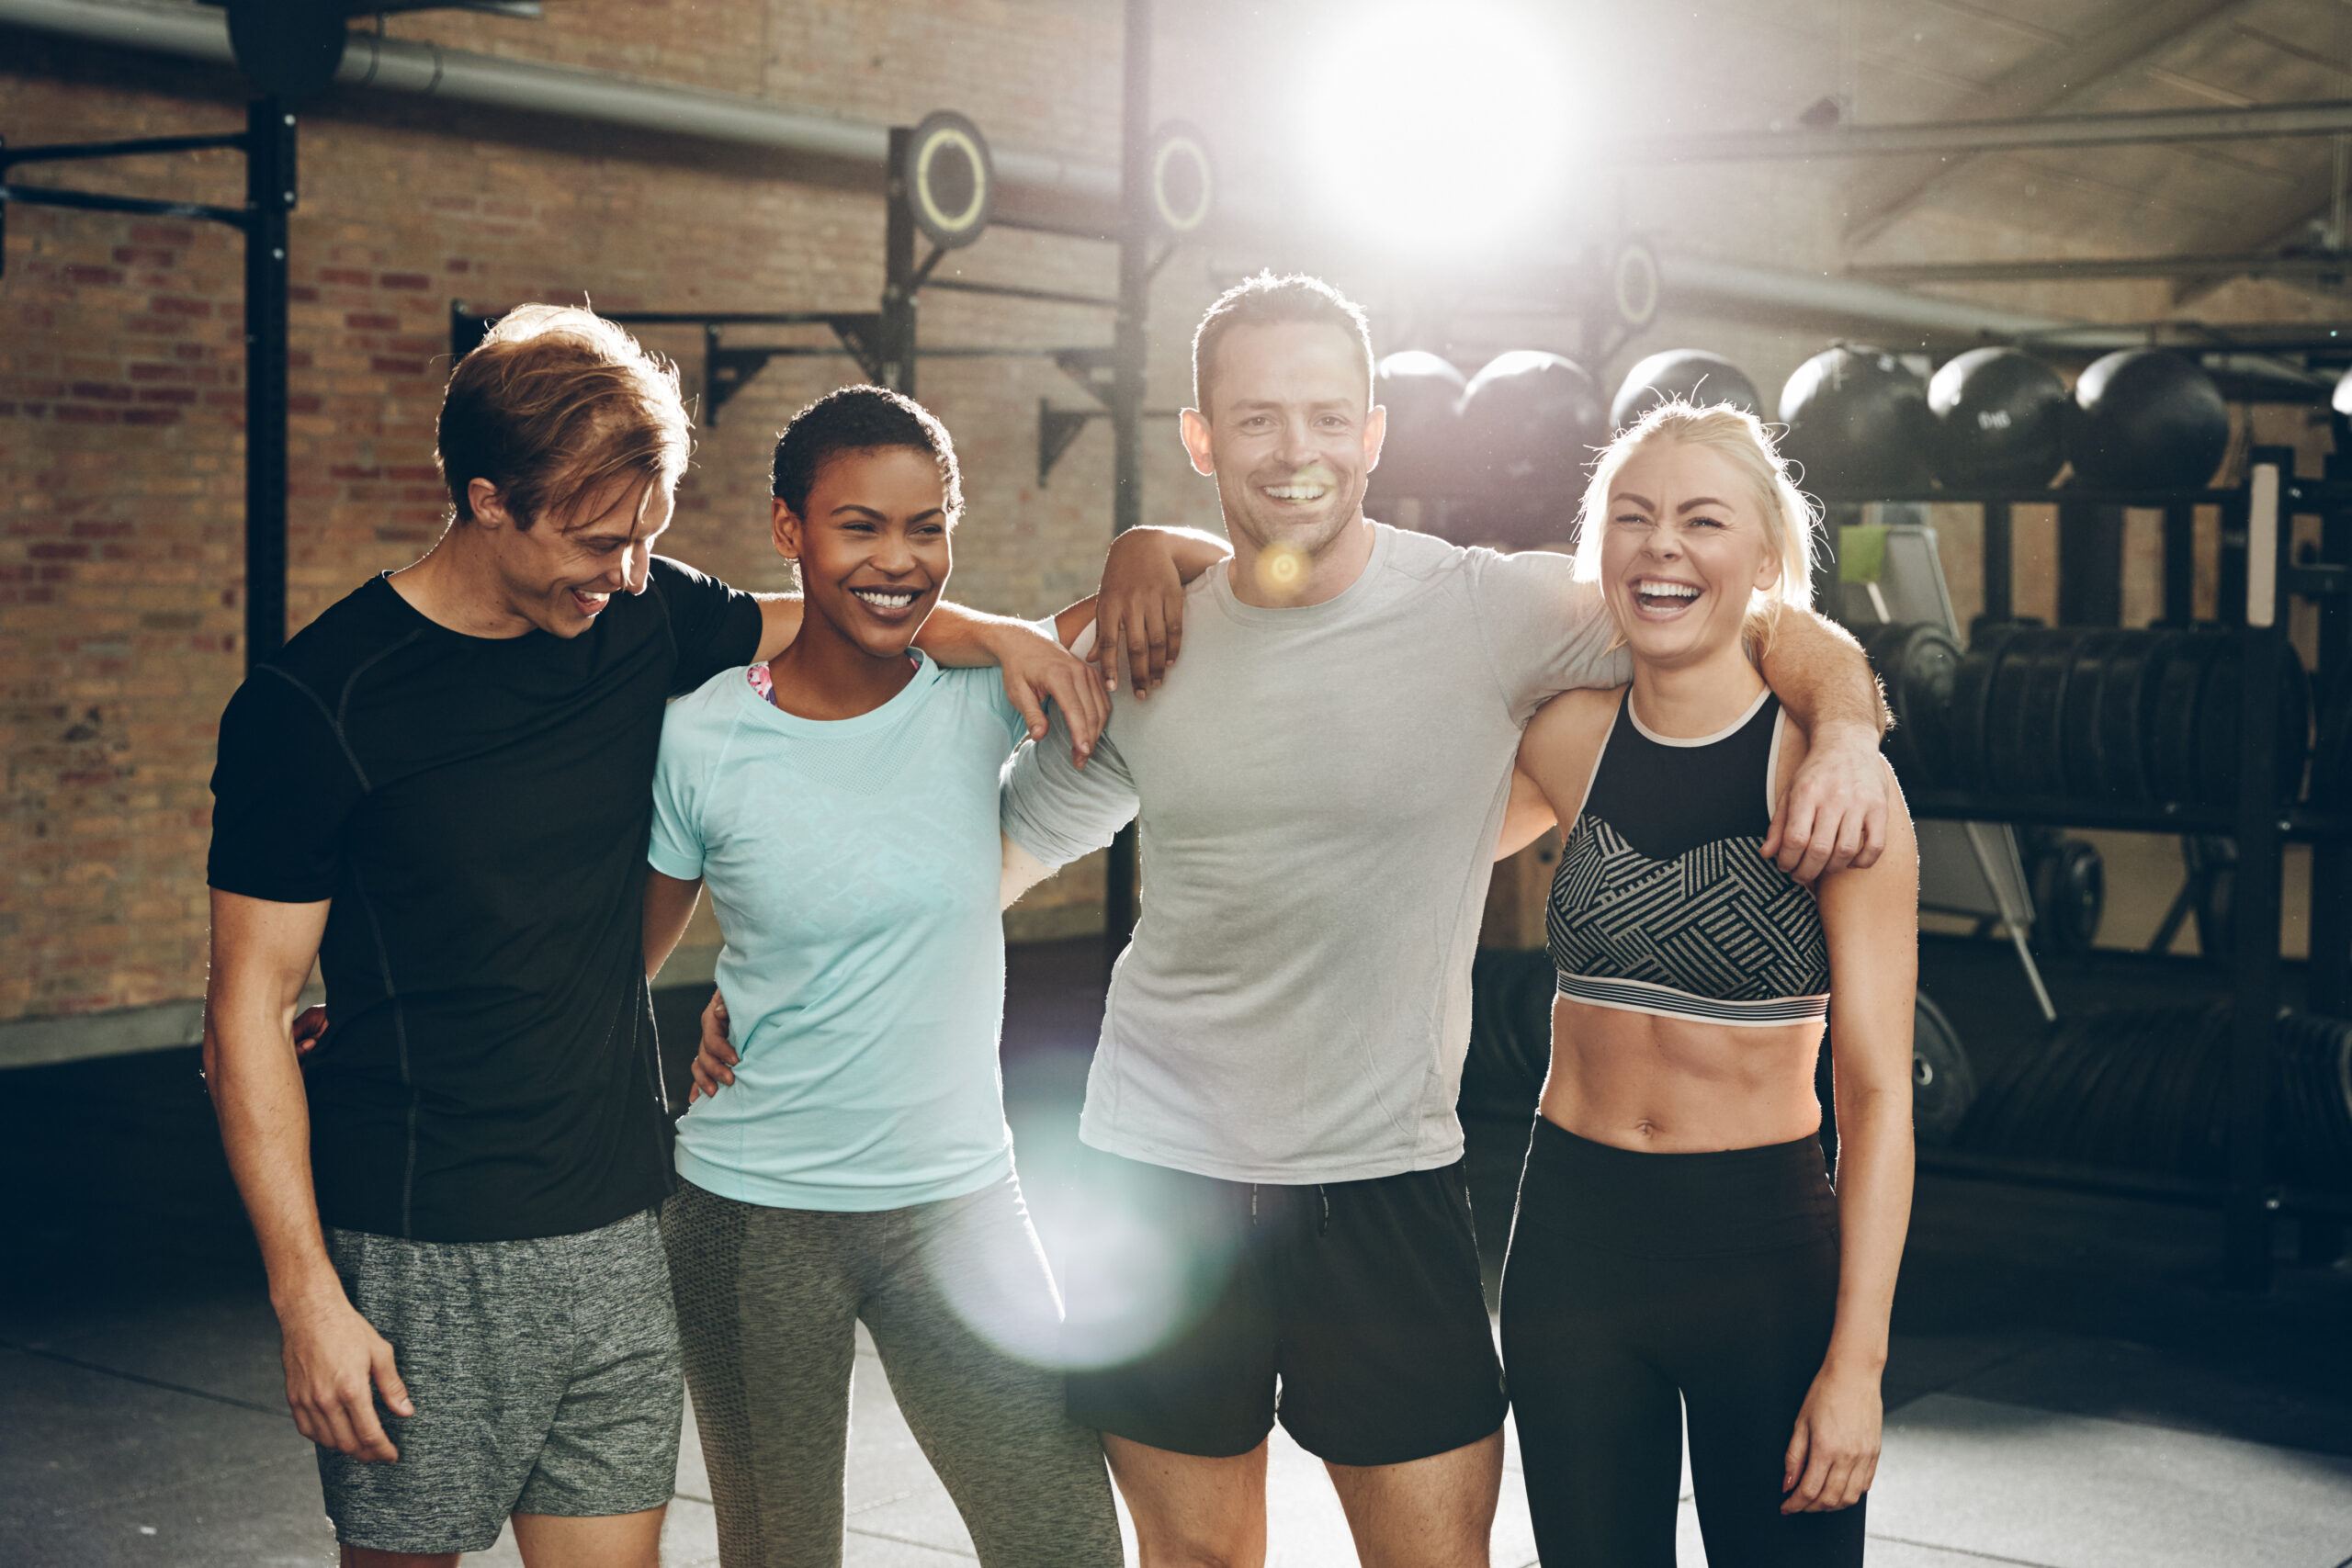 Diverse group of smiling friends in sportswear standing arm in arm together in a gym after a workout session